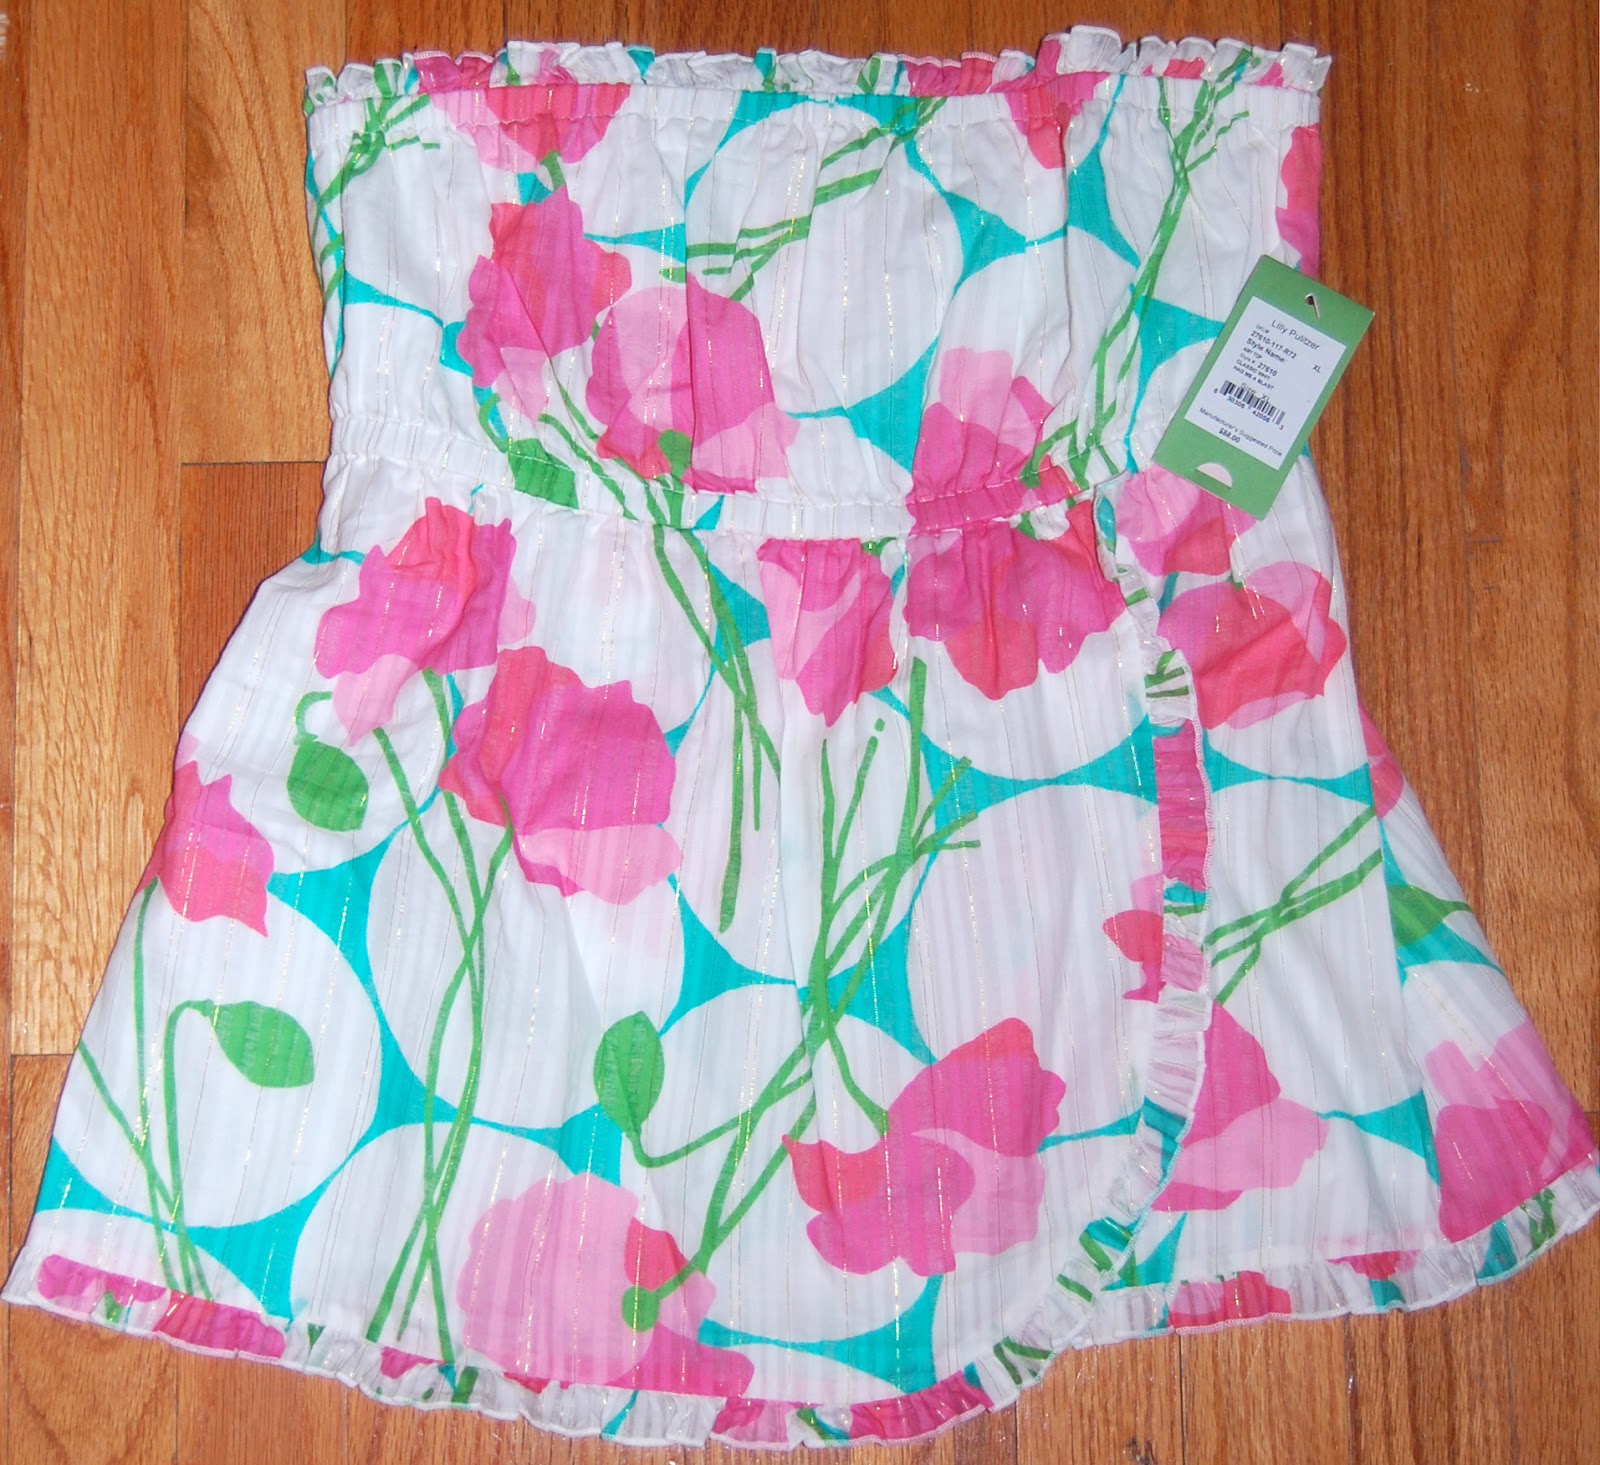 she wore it well: Lilly Pulitzer Strapless Top